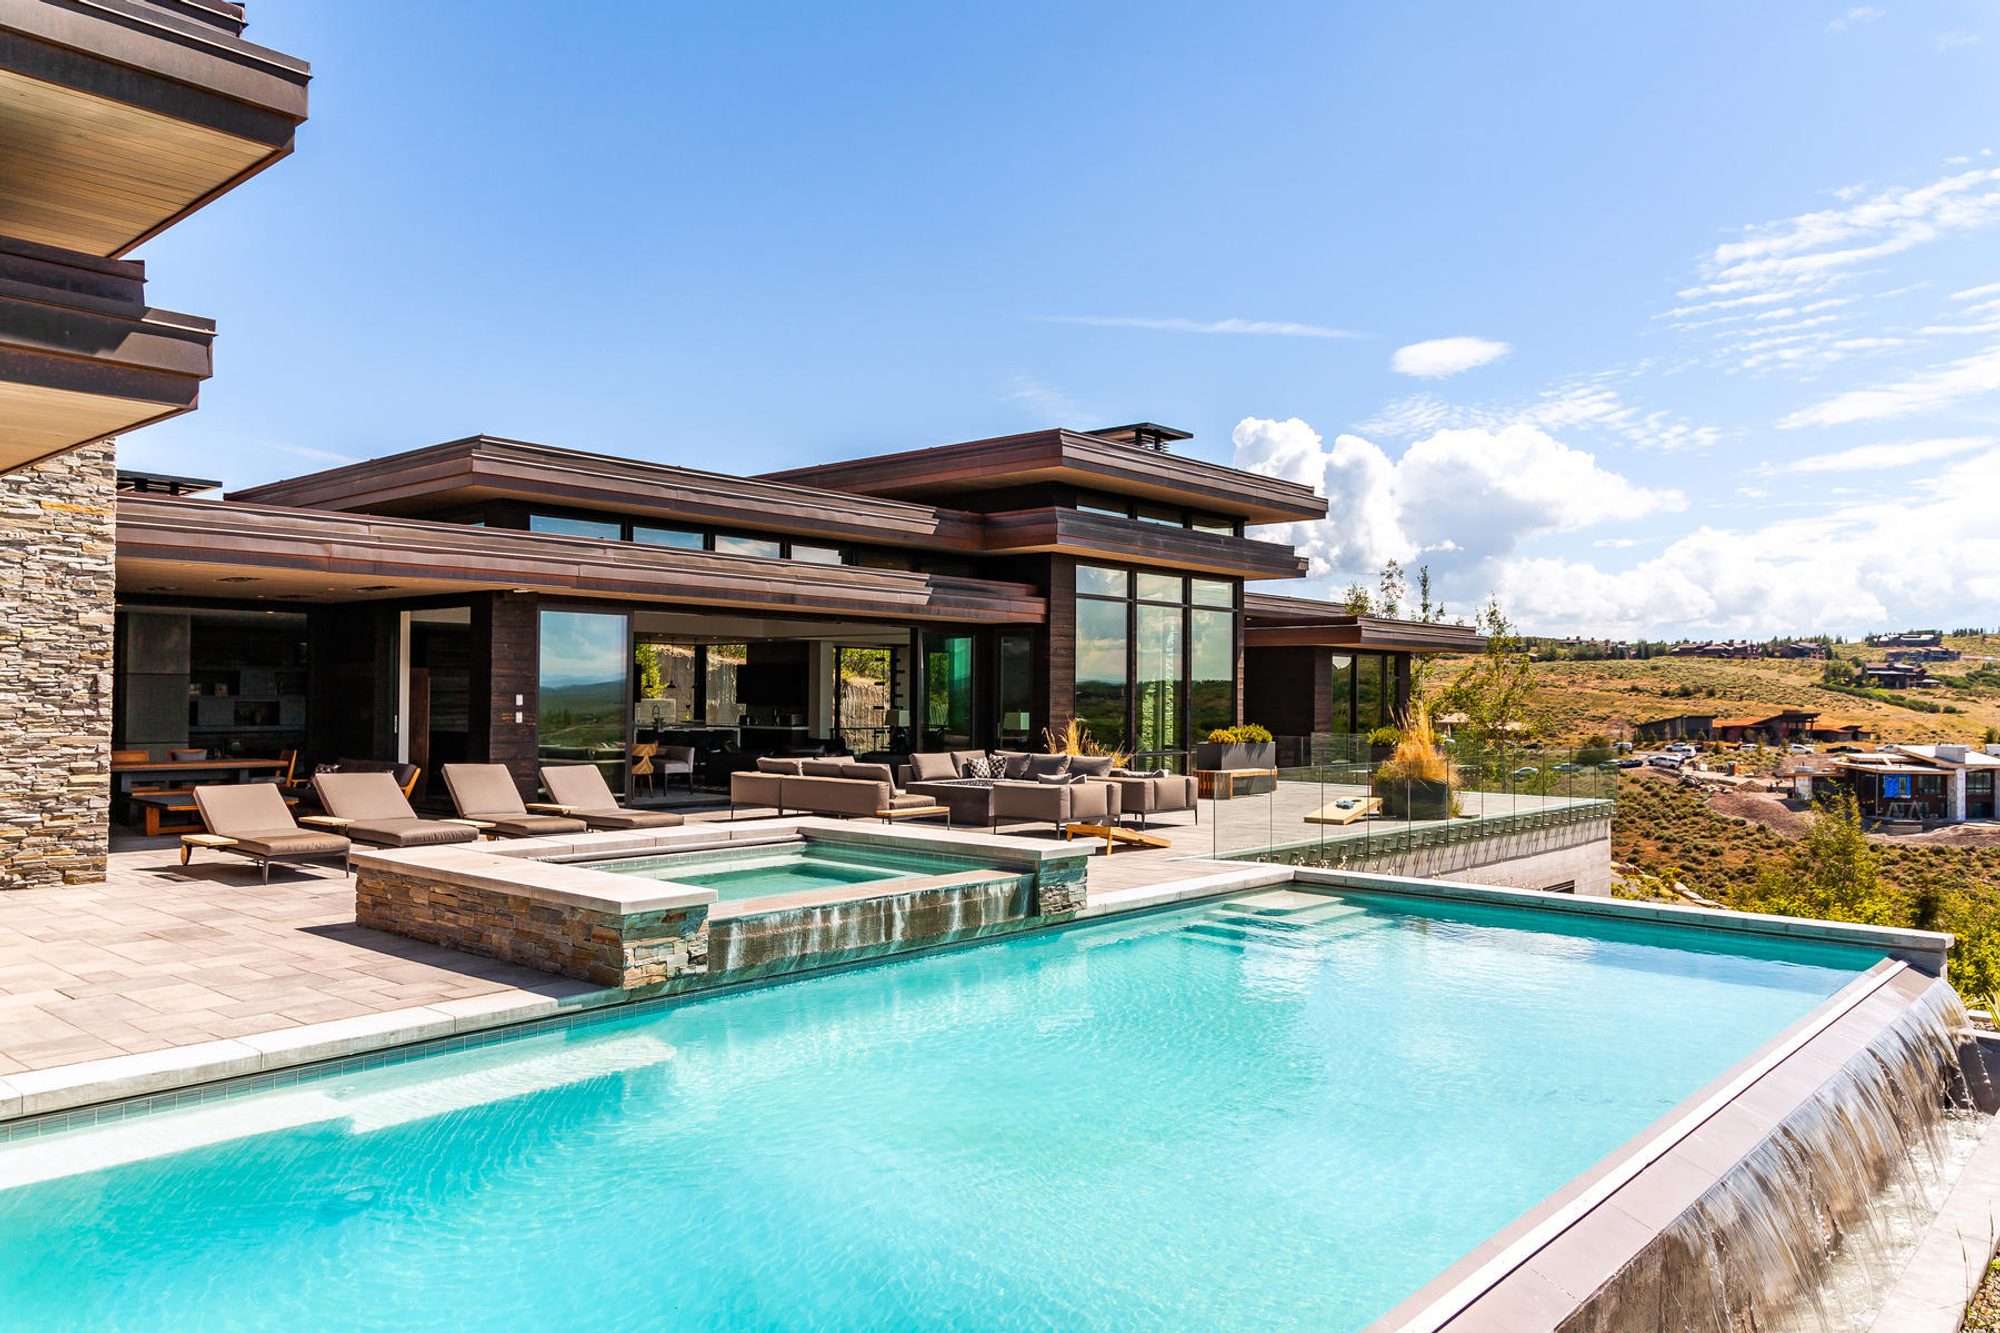 Modern home with wood, metal and stone siding, floor to ceiling windows and an infinity edge pool.